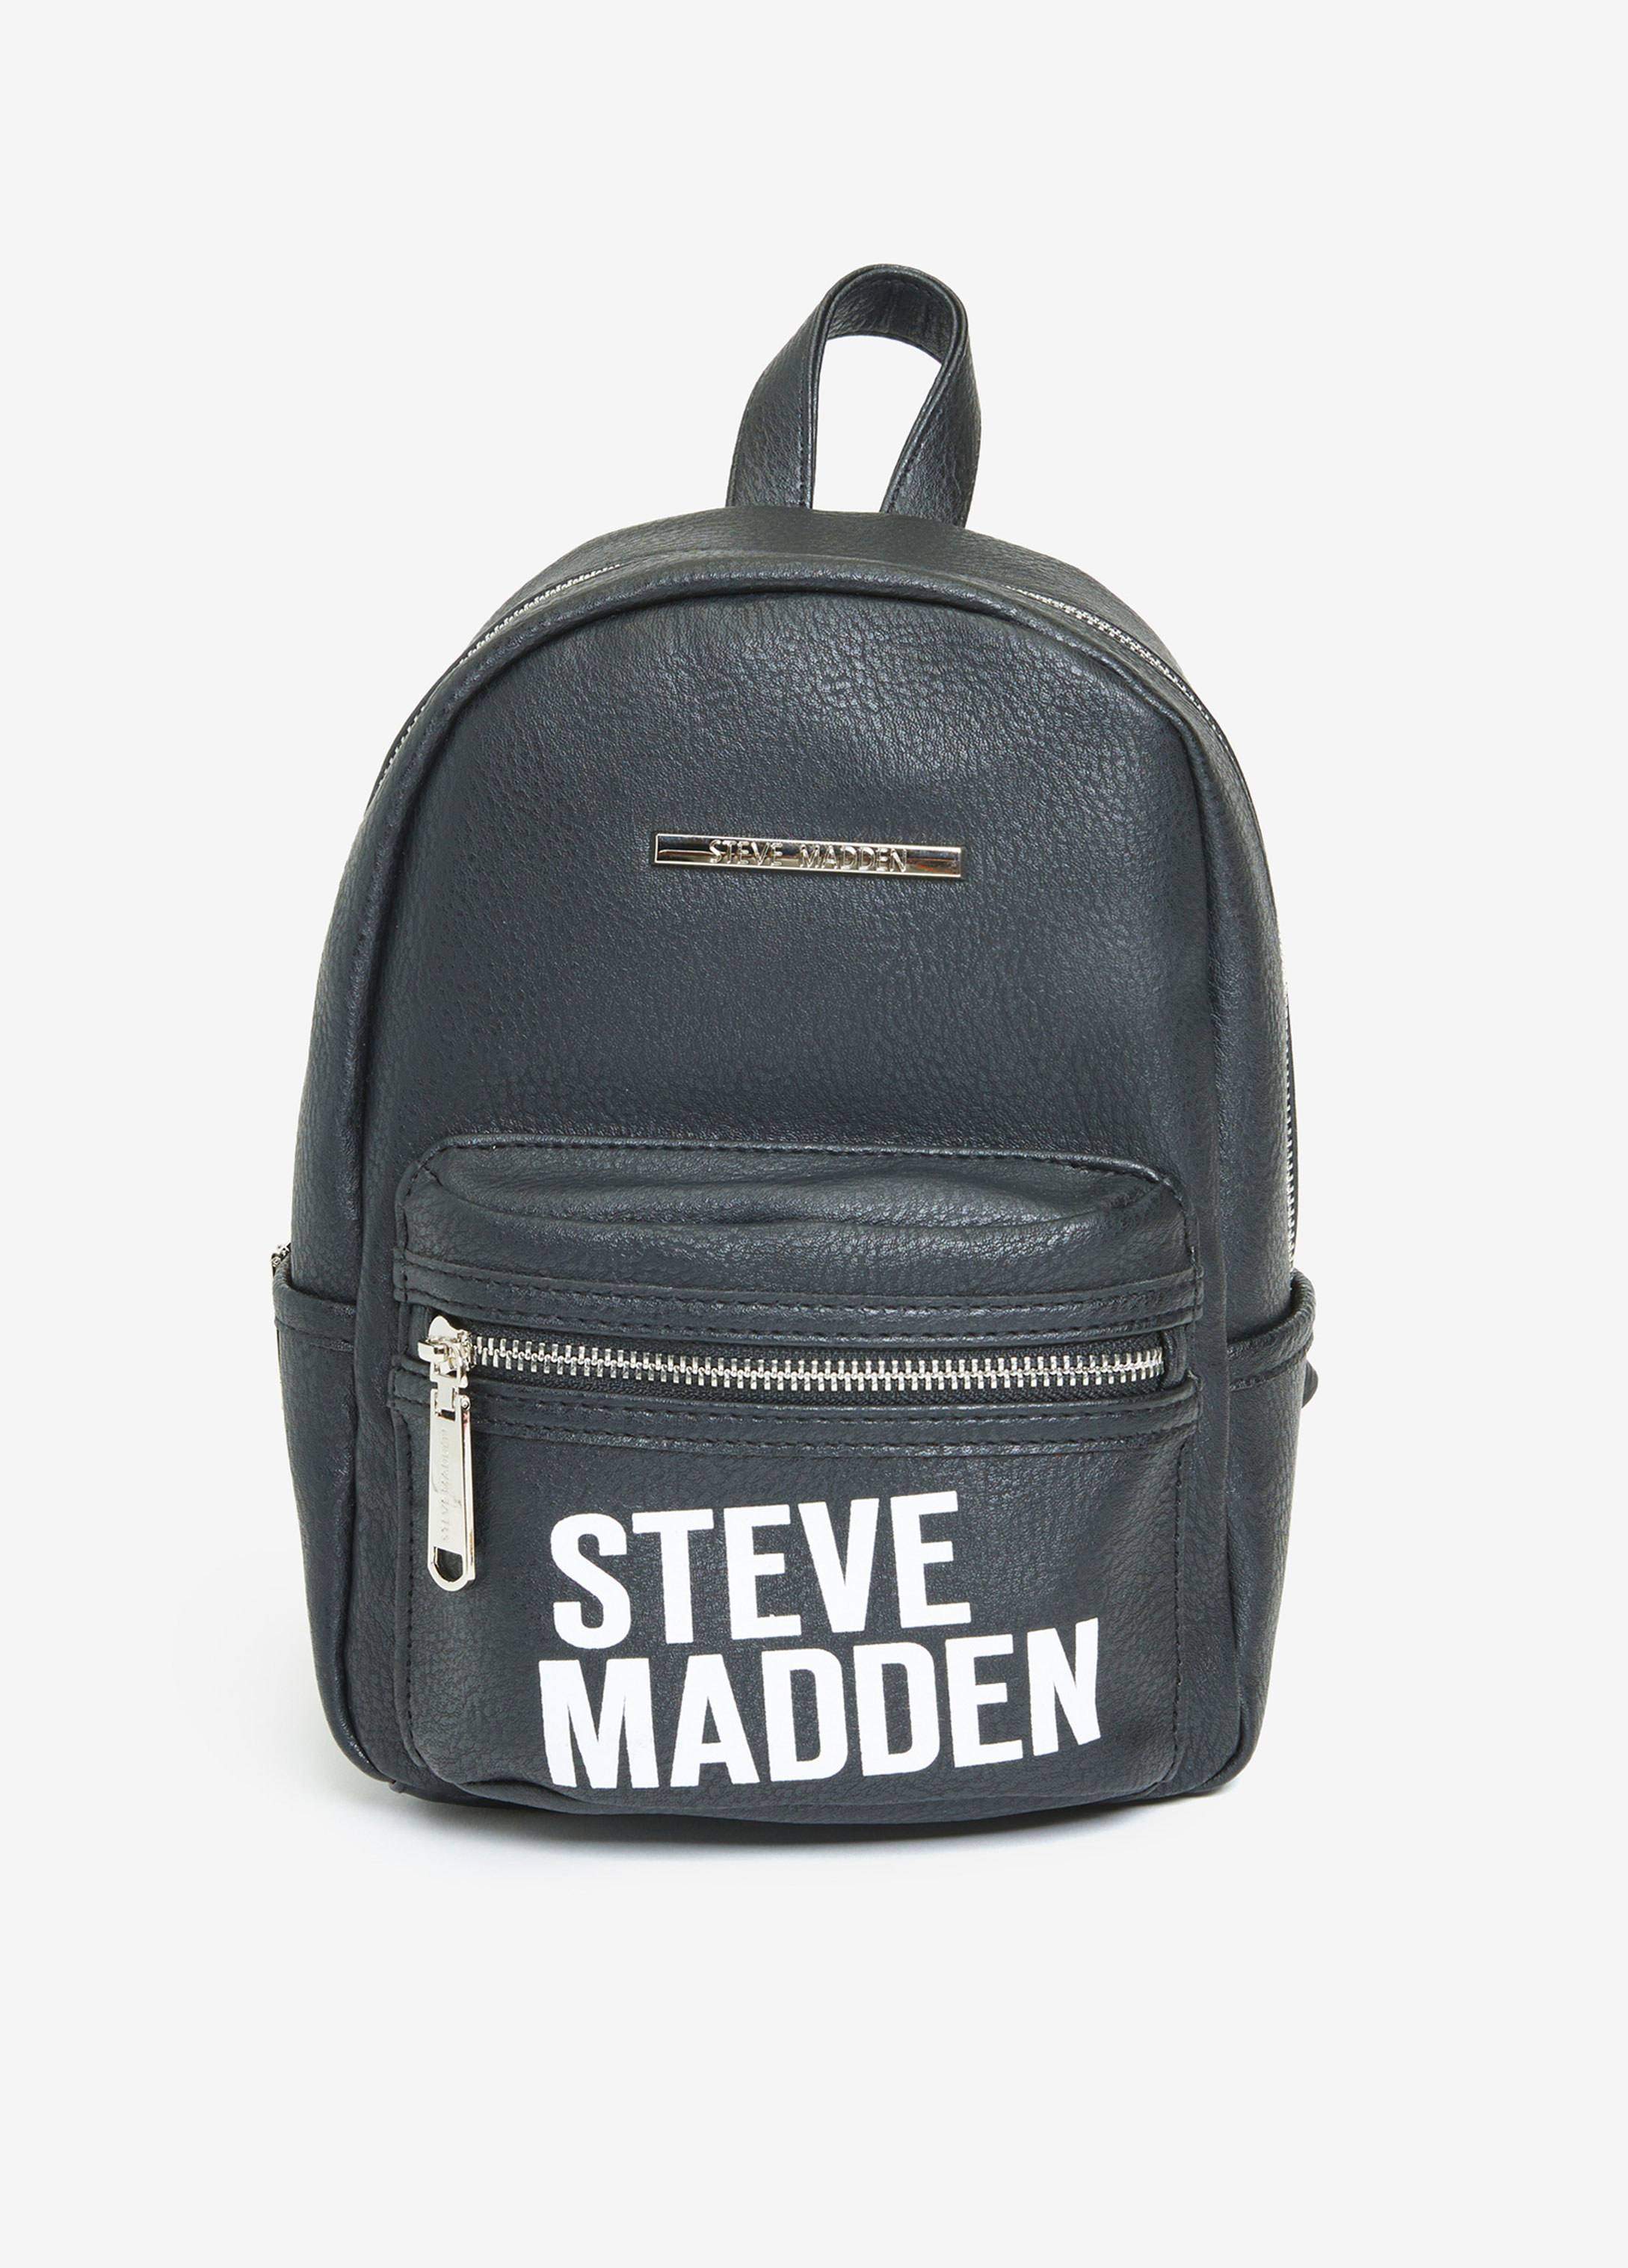 REVIEW CASUAL BAG FROM STEVE MADDEN FOR DAILY, Gallery posted by Grace  Sabartina